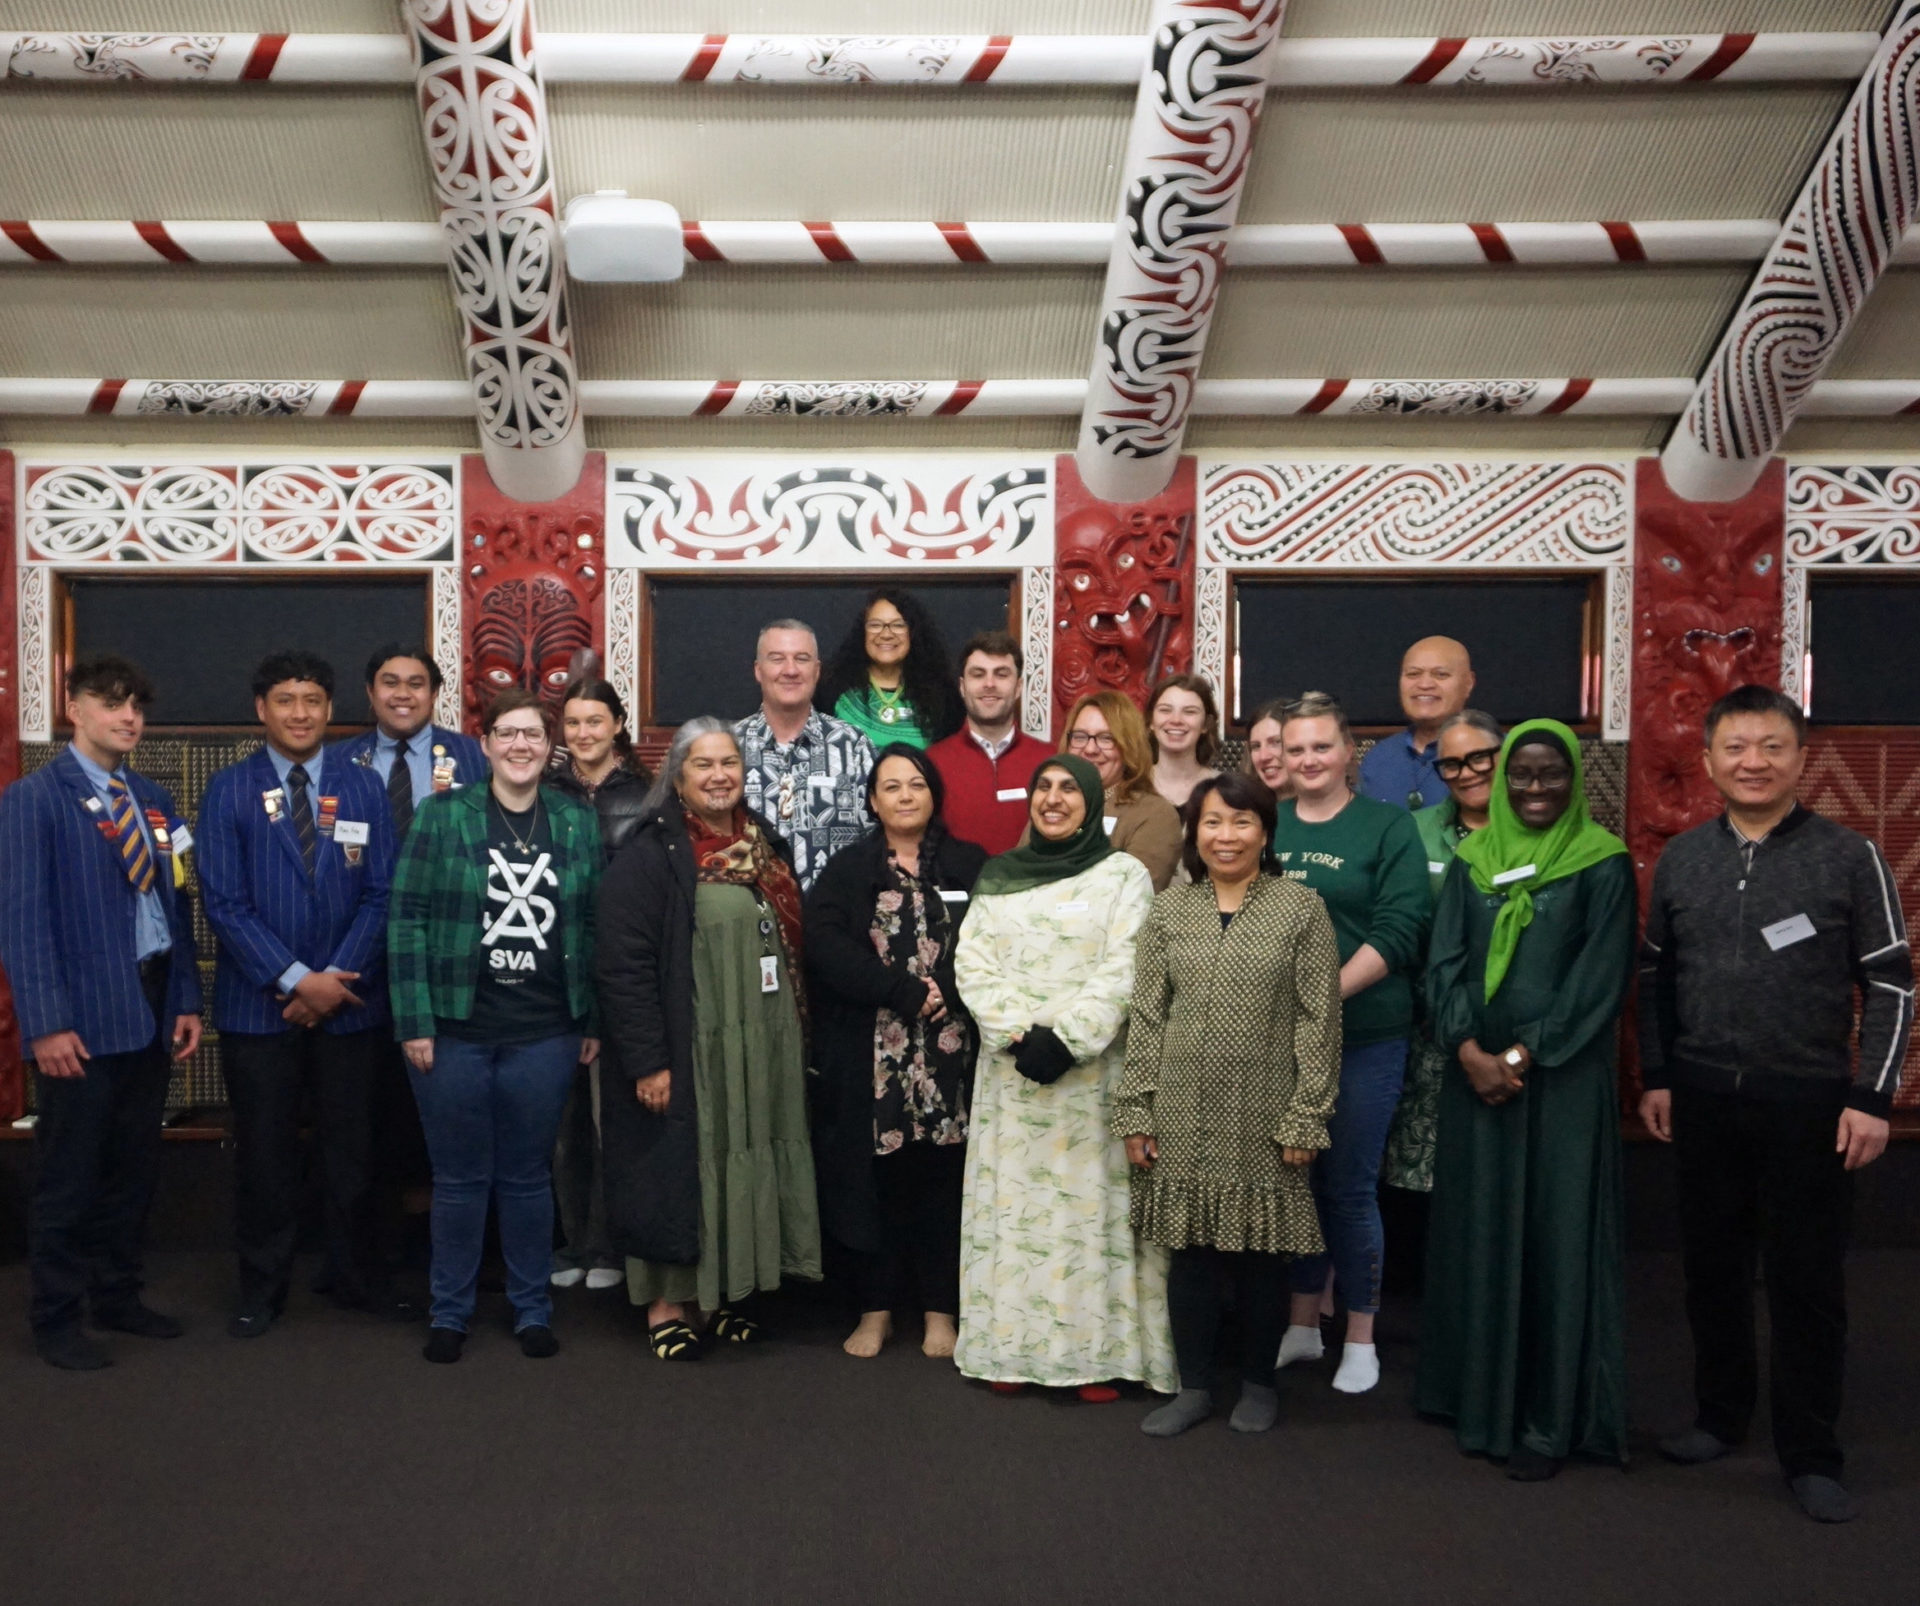 A group photo taken in the marae during our Christchurch hui